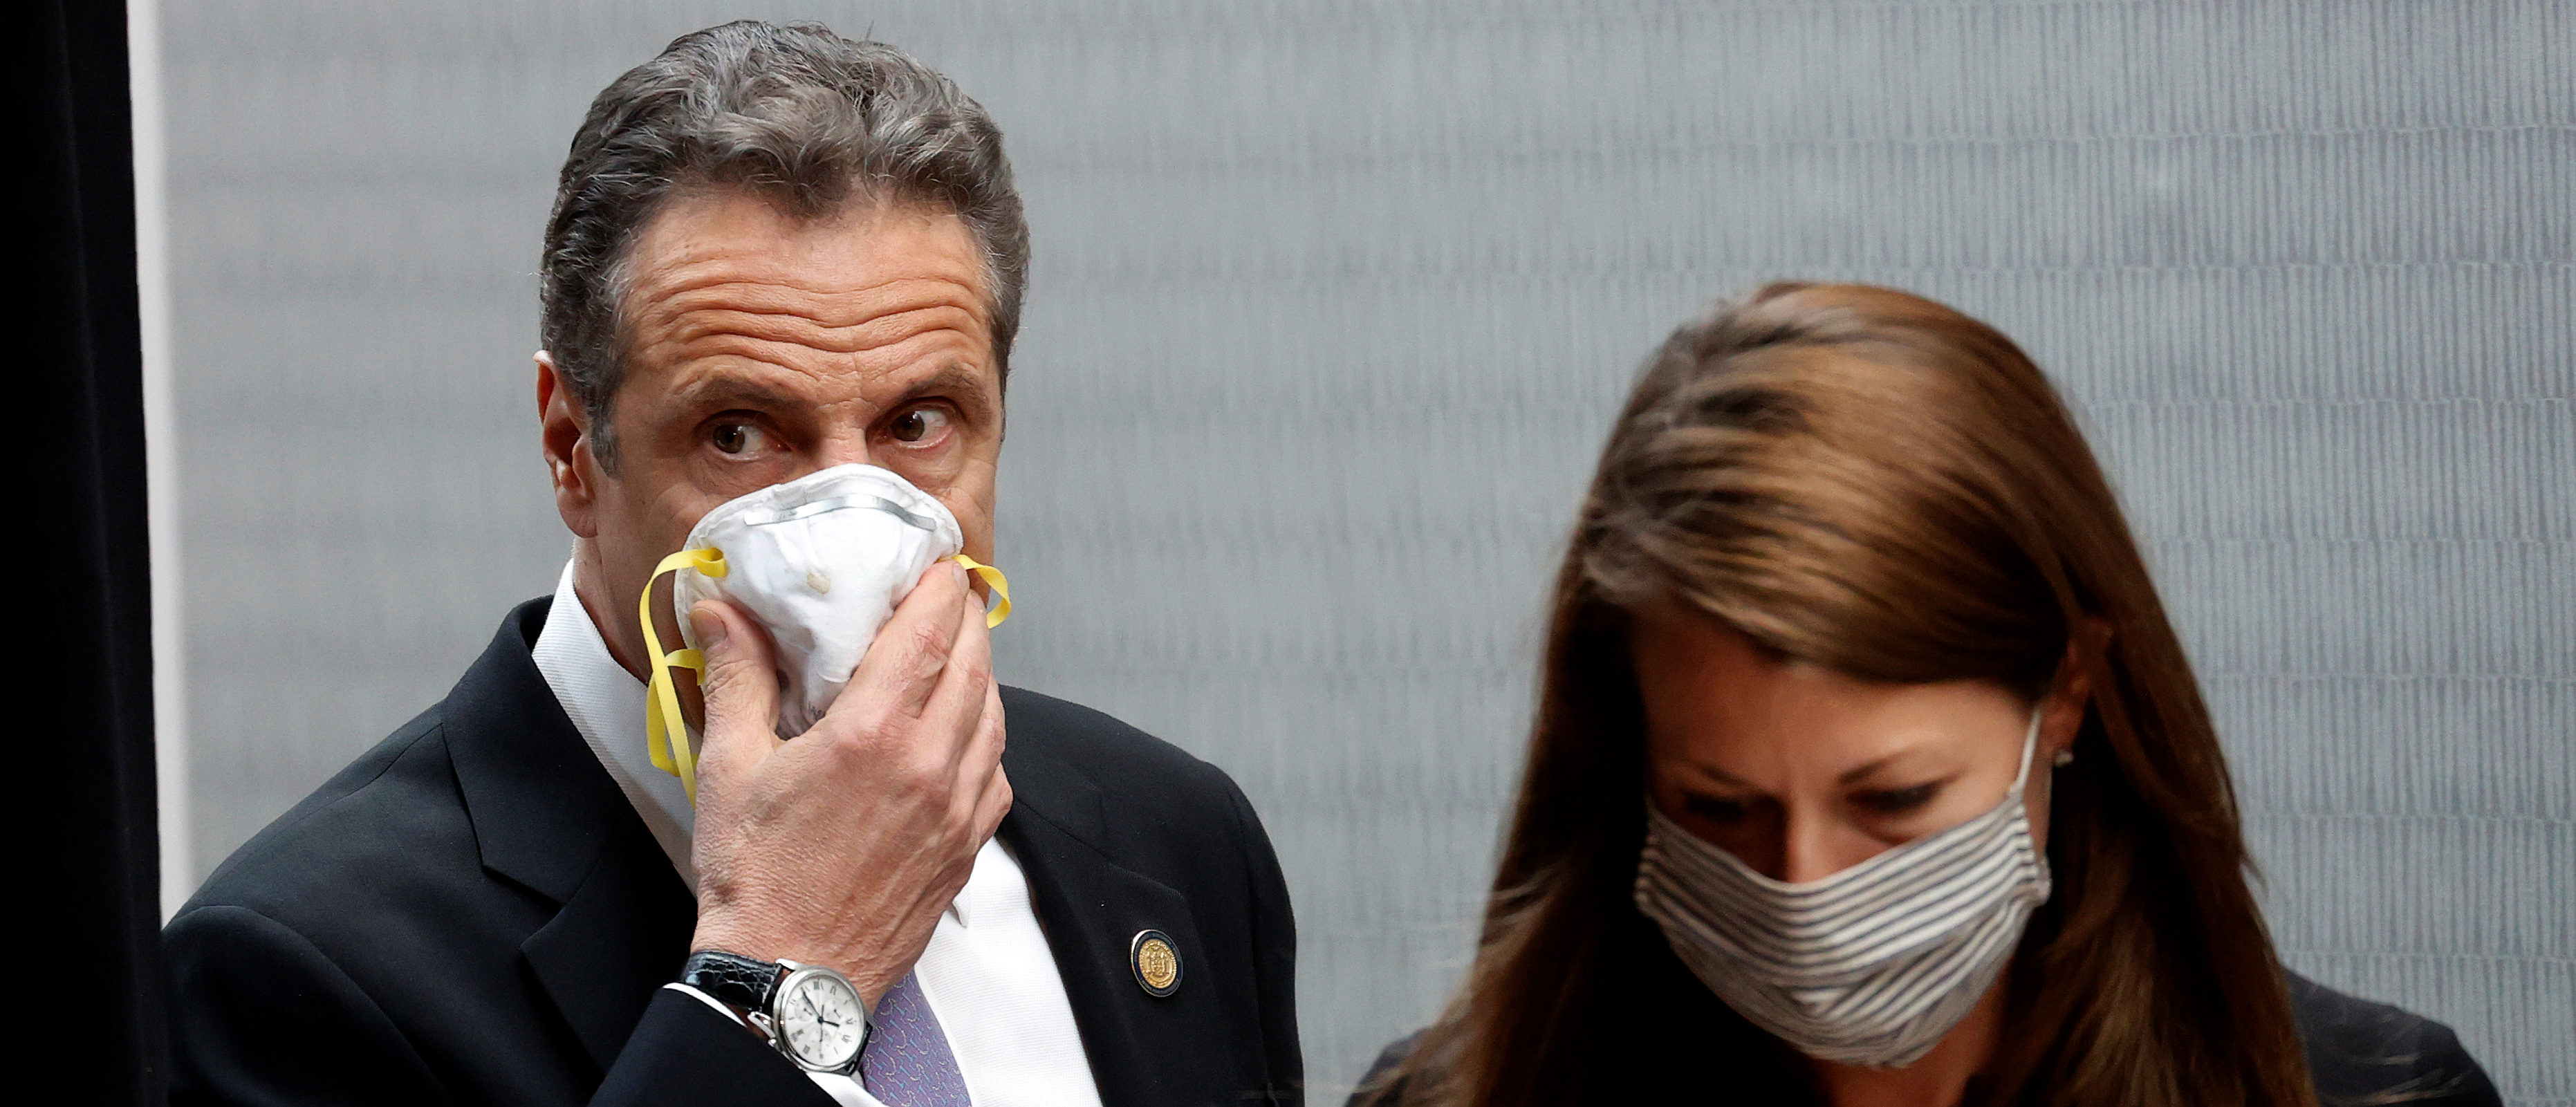 New York Governor Andrew Cuomo holds a protective mask to his face as he and Secretary to the Governor Melissa DeRosa arrive for a daily briefing at New York Medical College during the outbreak of the coronavirus disease (COVID-19) in Valhalla, New York, U.S., May 7, 2020. REUTERS/Mike Segar